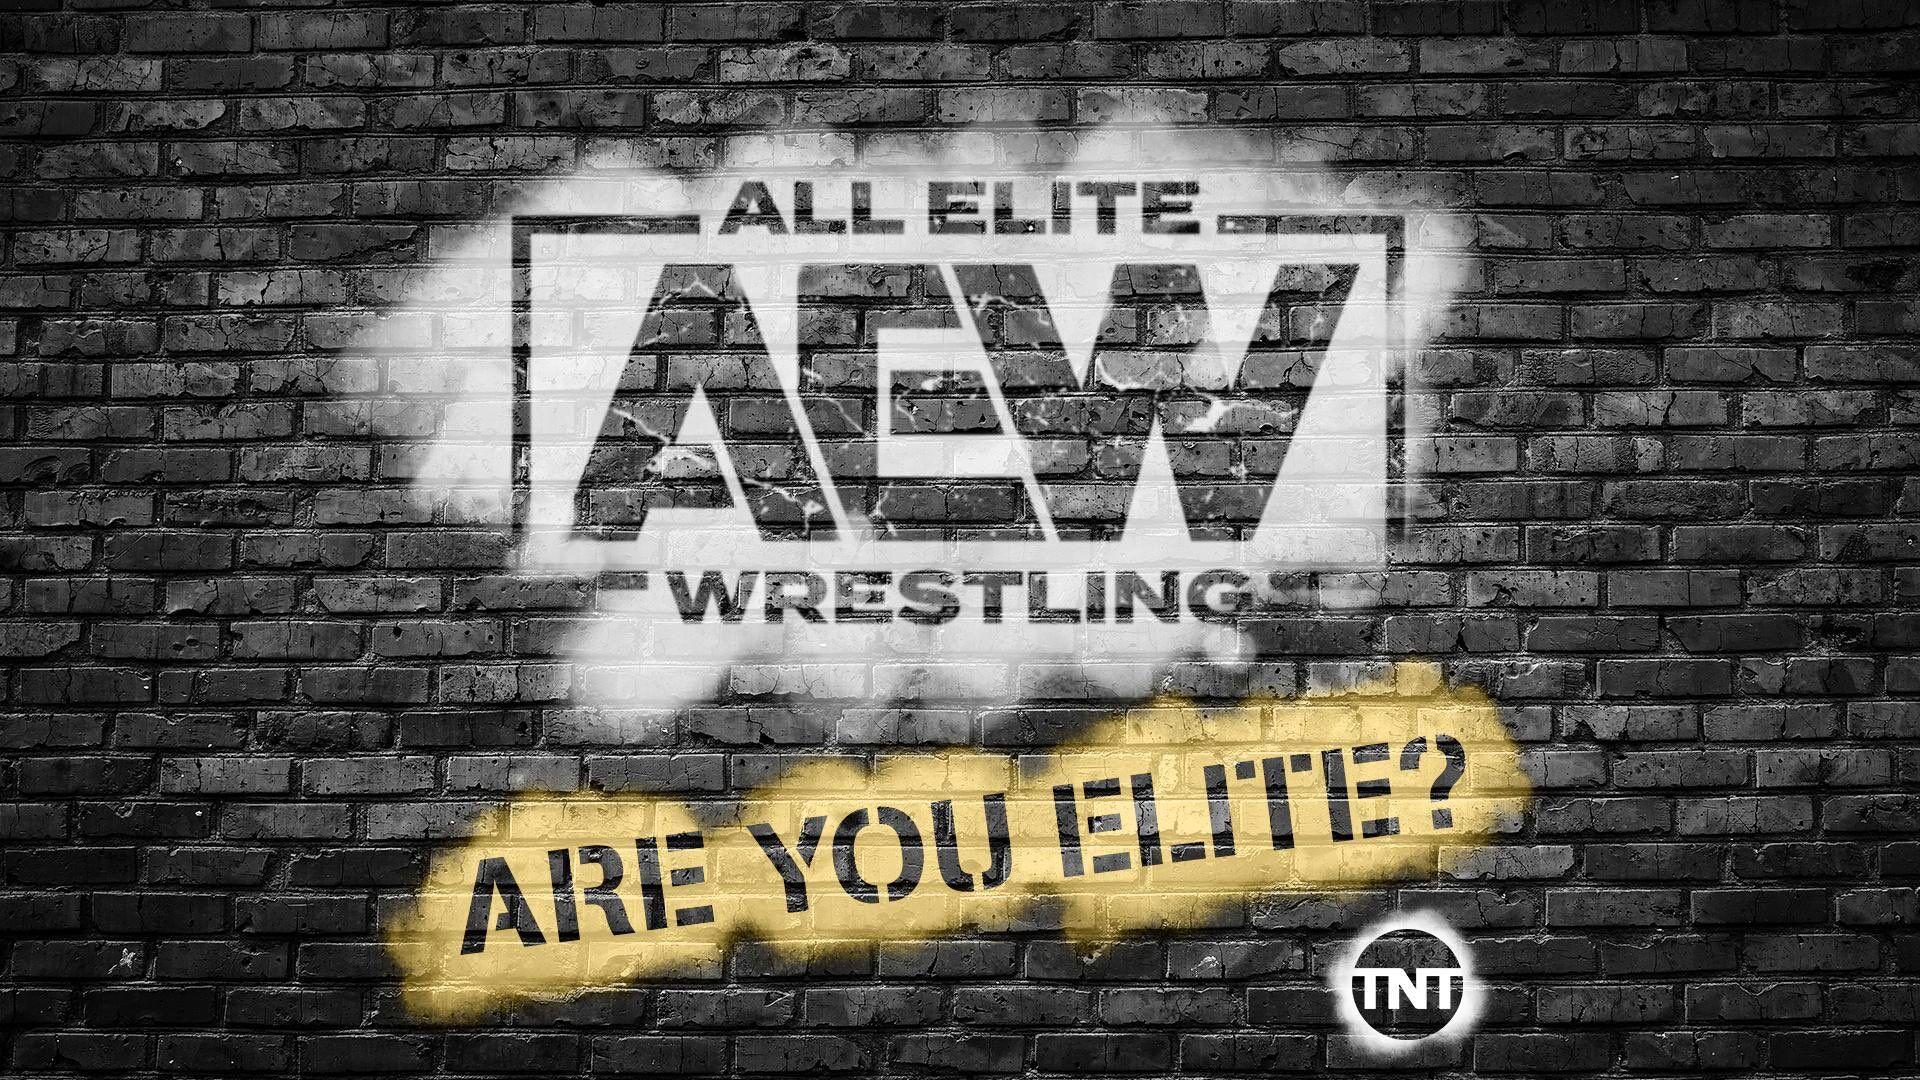 We finally know when AEW will be airing shows